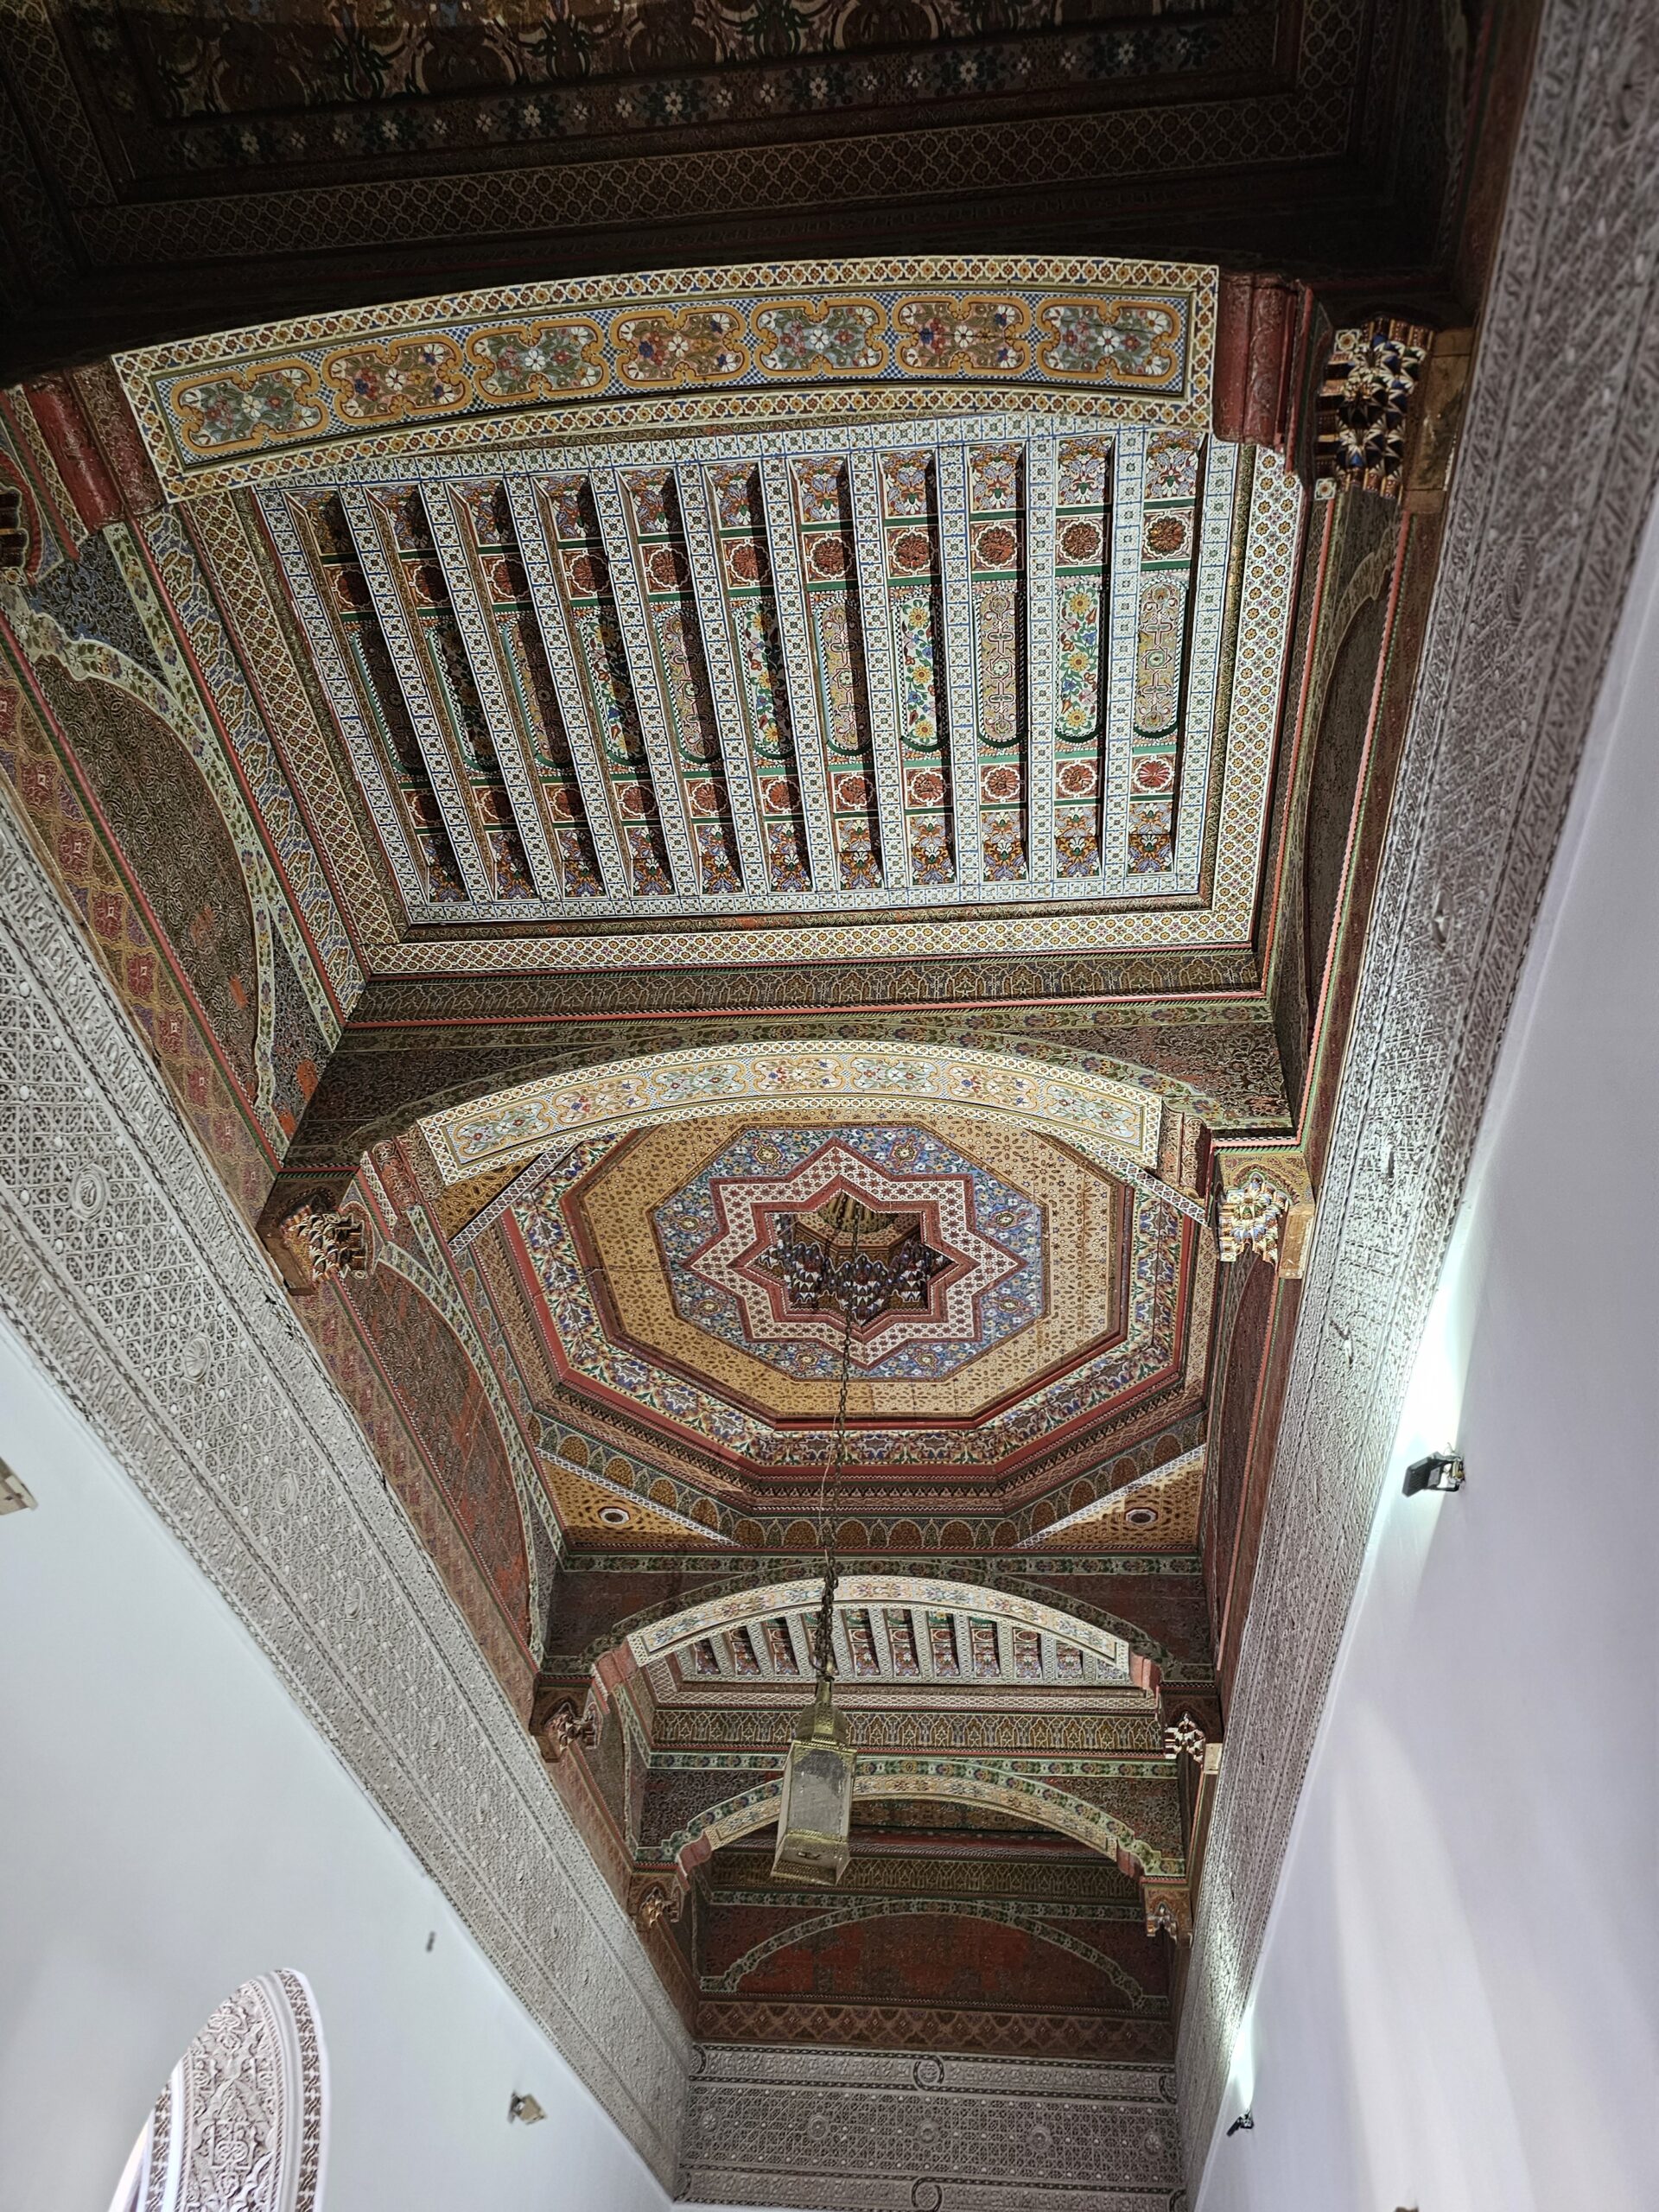 A beautifully designed and colourful ceiling at Bahia Palace, Marrakesh. A fine example of Islamic decor. Image by 360onhistory.com